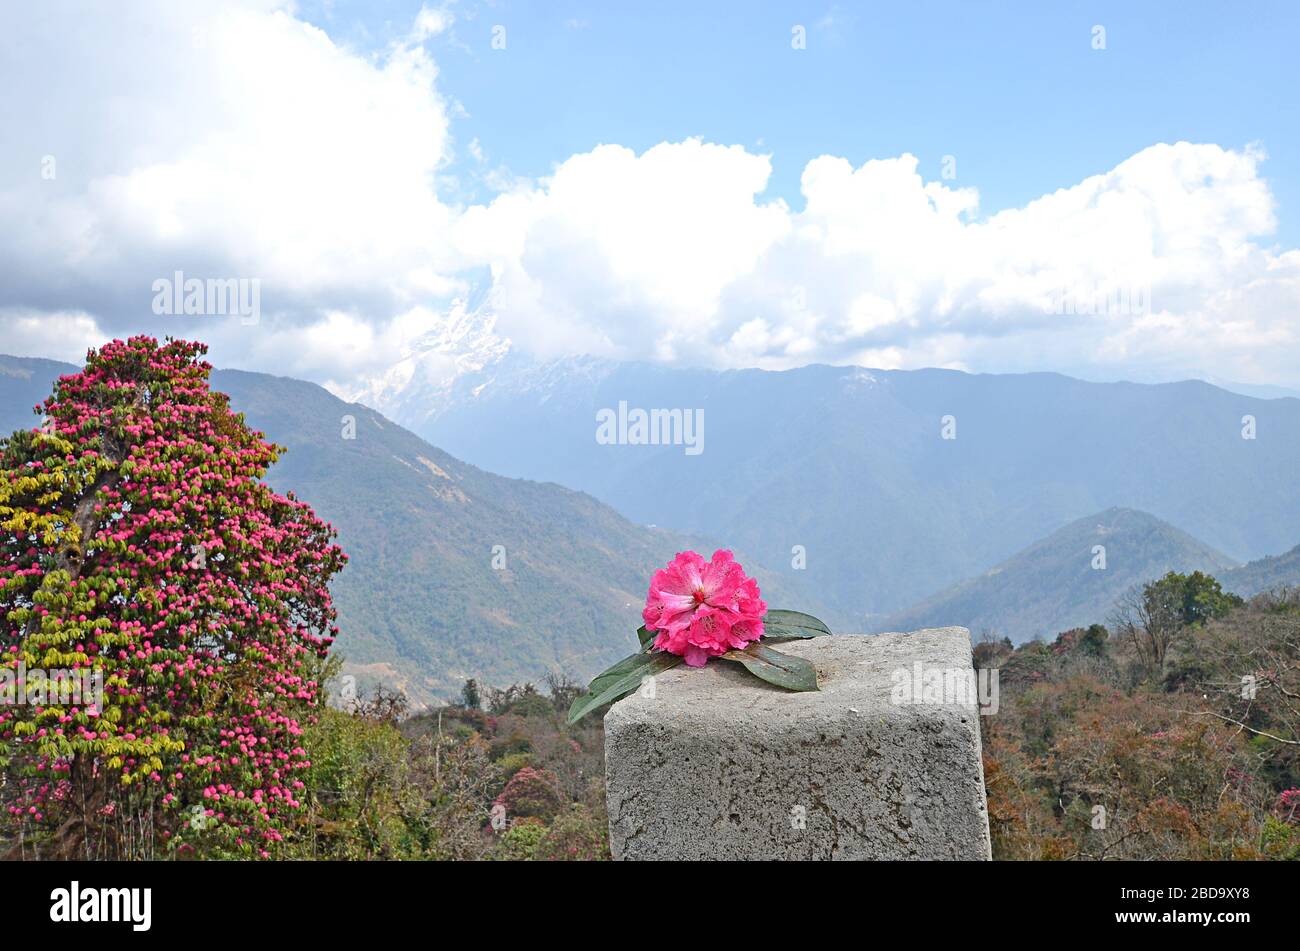 Magnificent blossoms rhododendrons on a background of white peaks in the Himalayas, Nepal Stock Photo